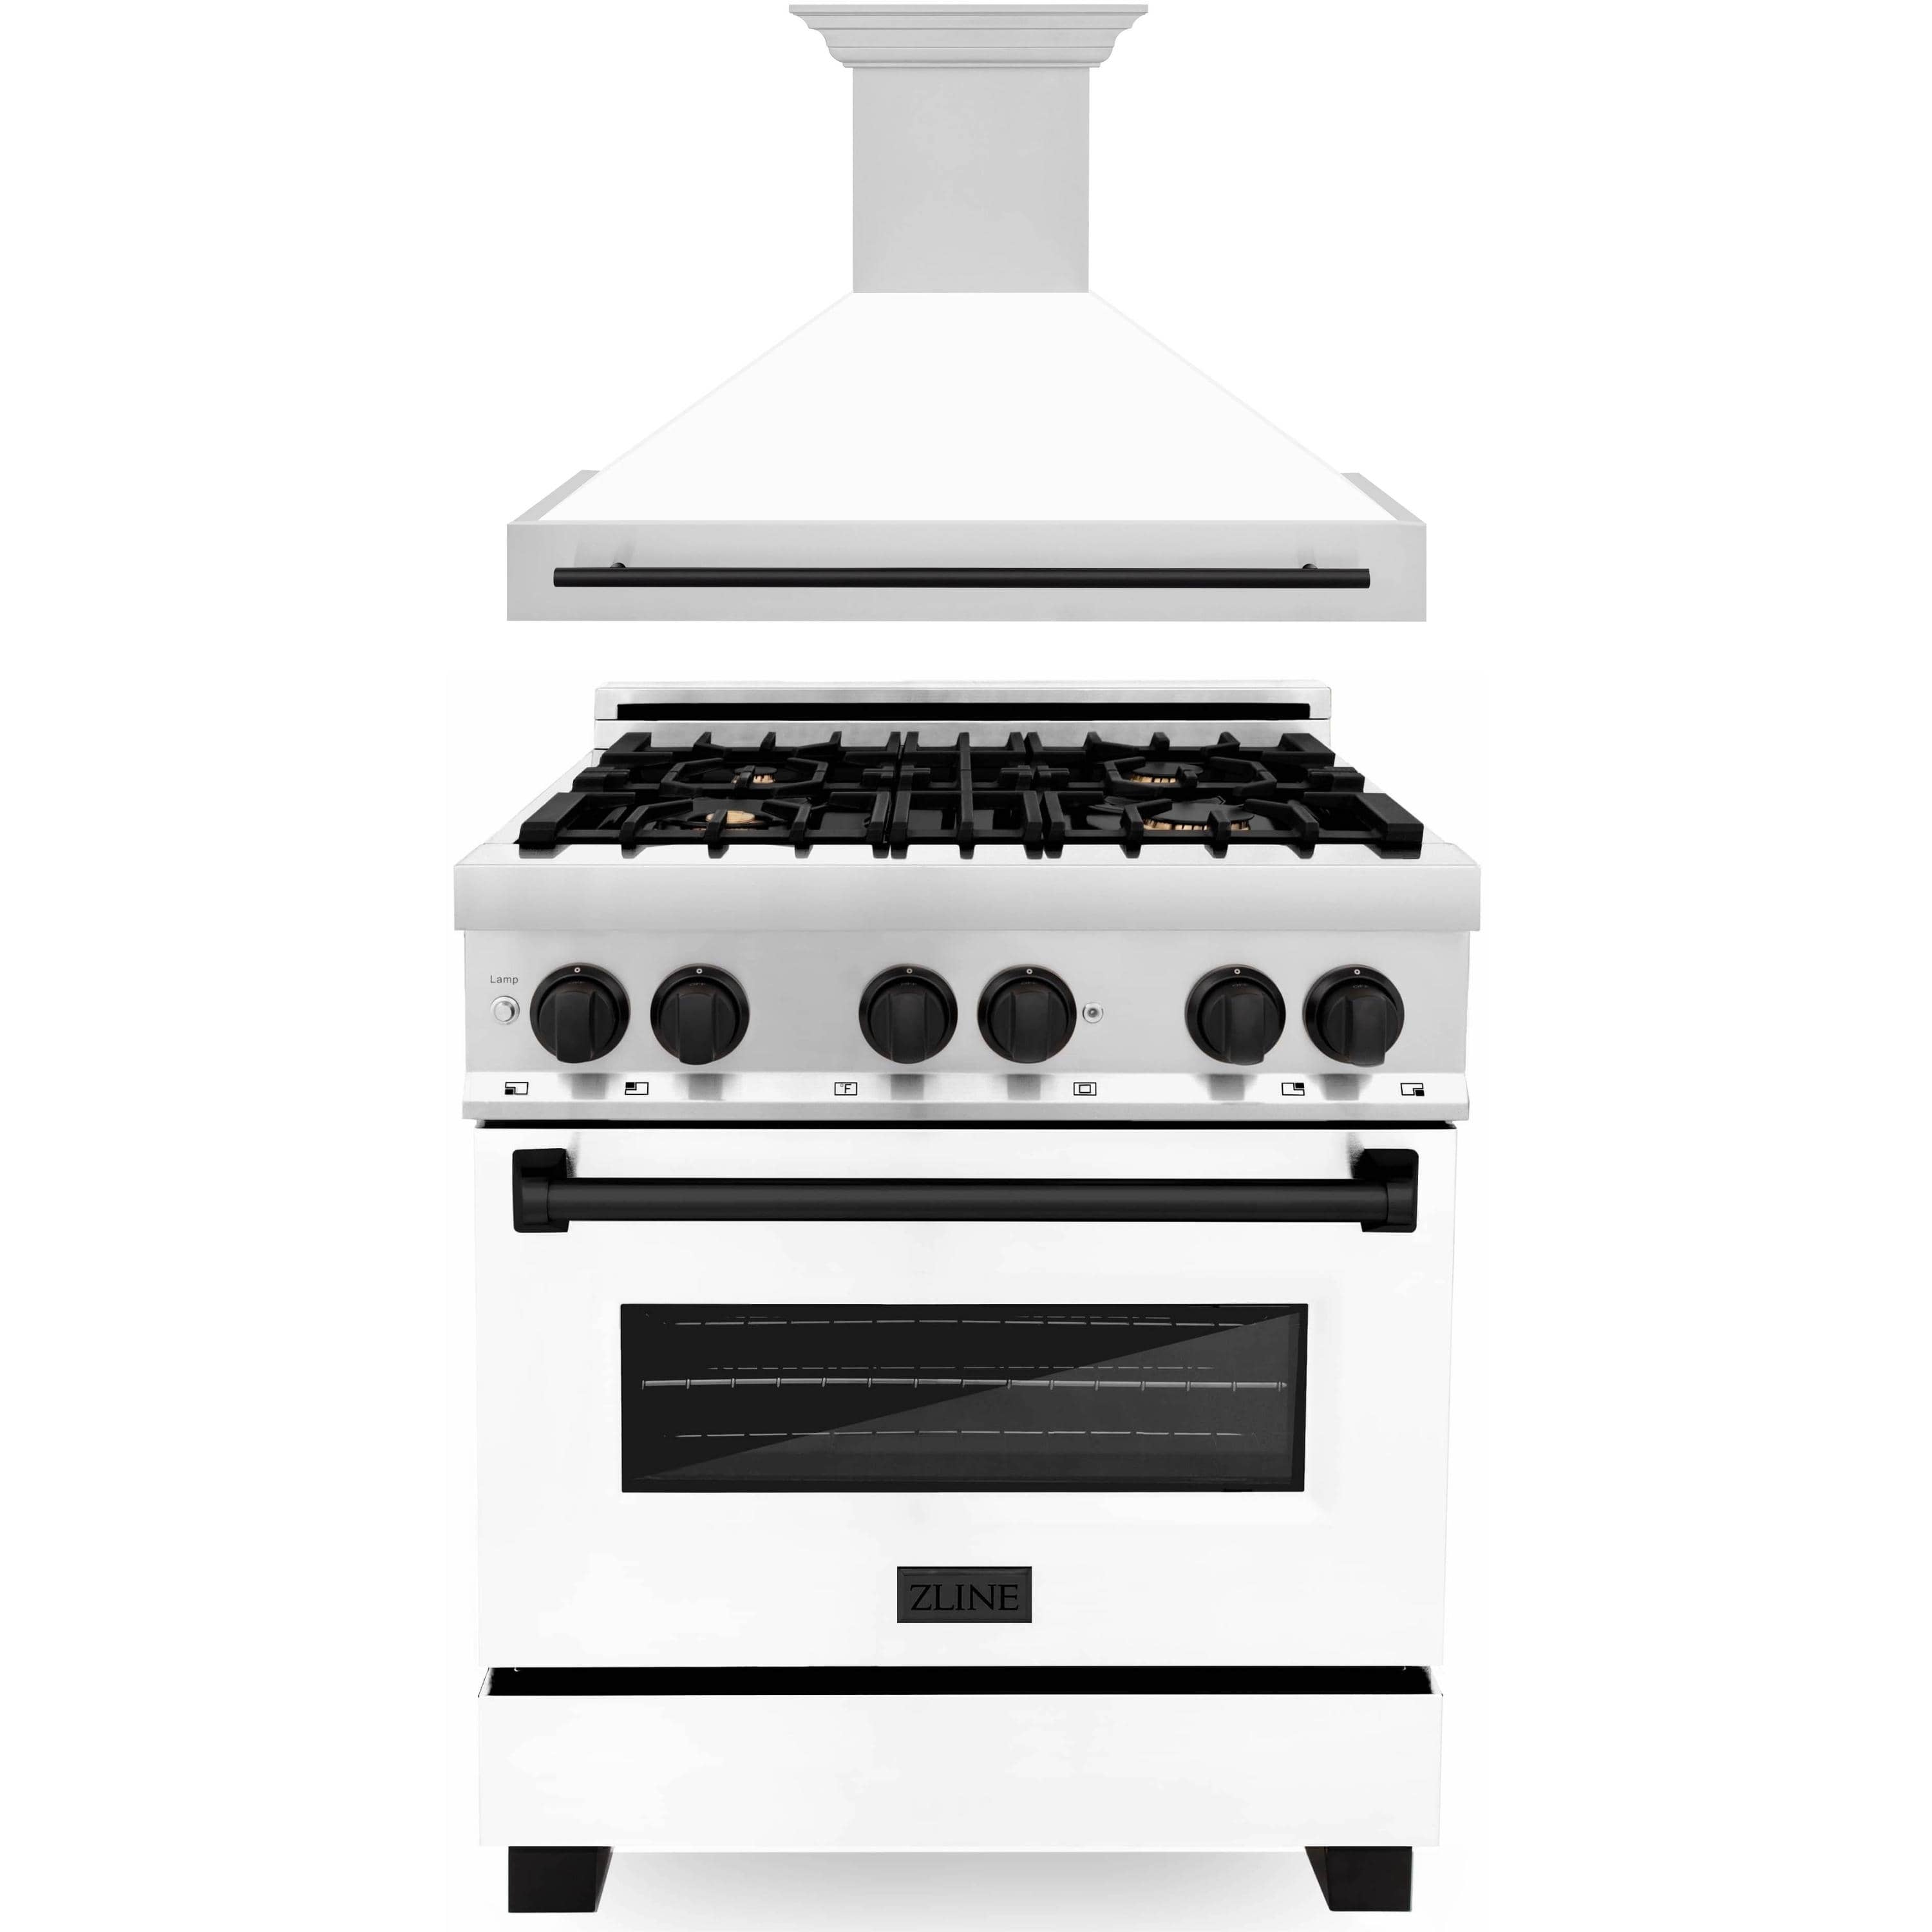 ZLINE Autograph Edition 2-Piece Appliance Package - 30-Inch Dual Fuel Range & Wall Mounted Range Hood in Stainless Steel and White Door with Matte Black Trim (2AKP-RAWMRH30-MB)